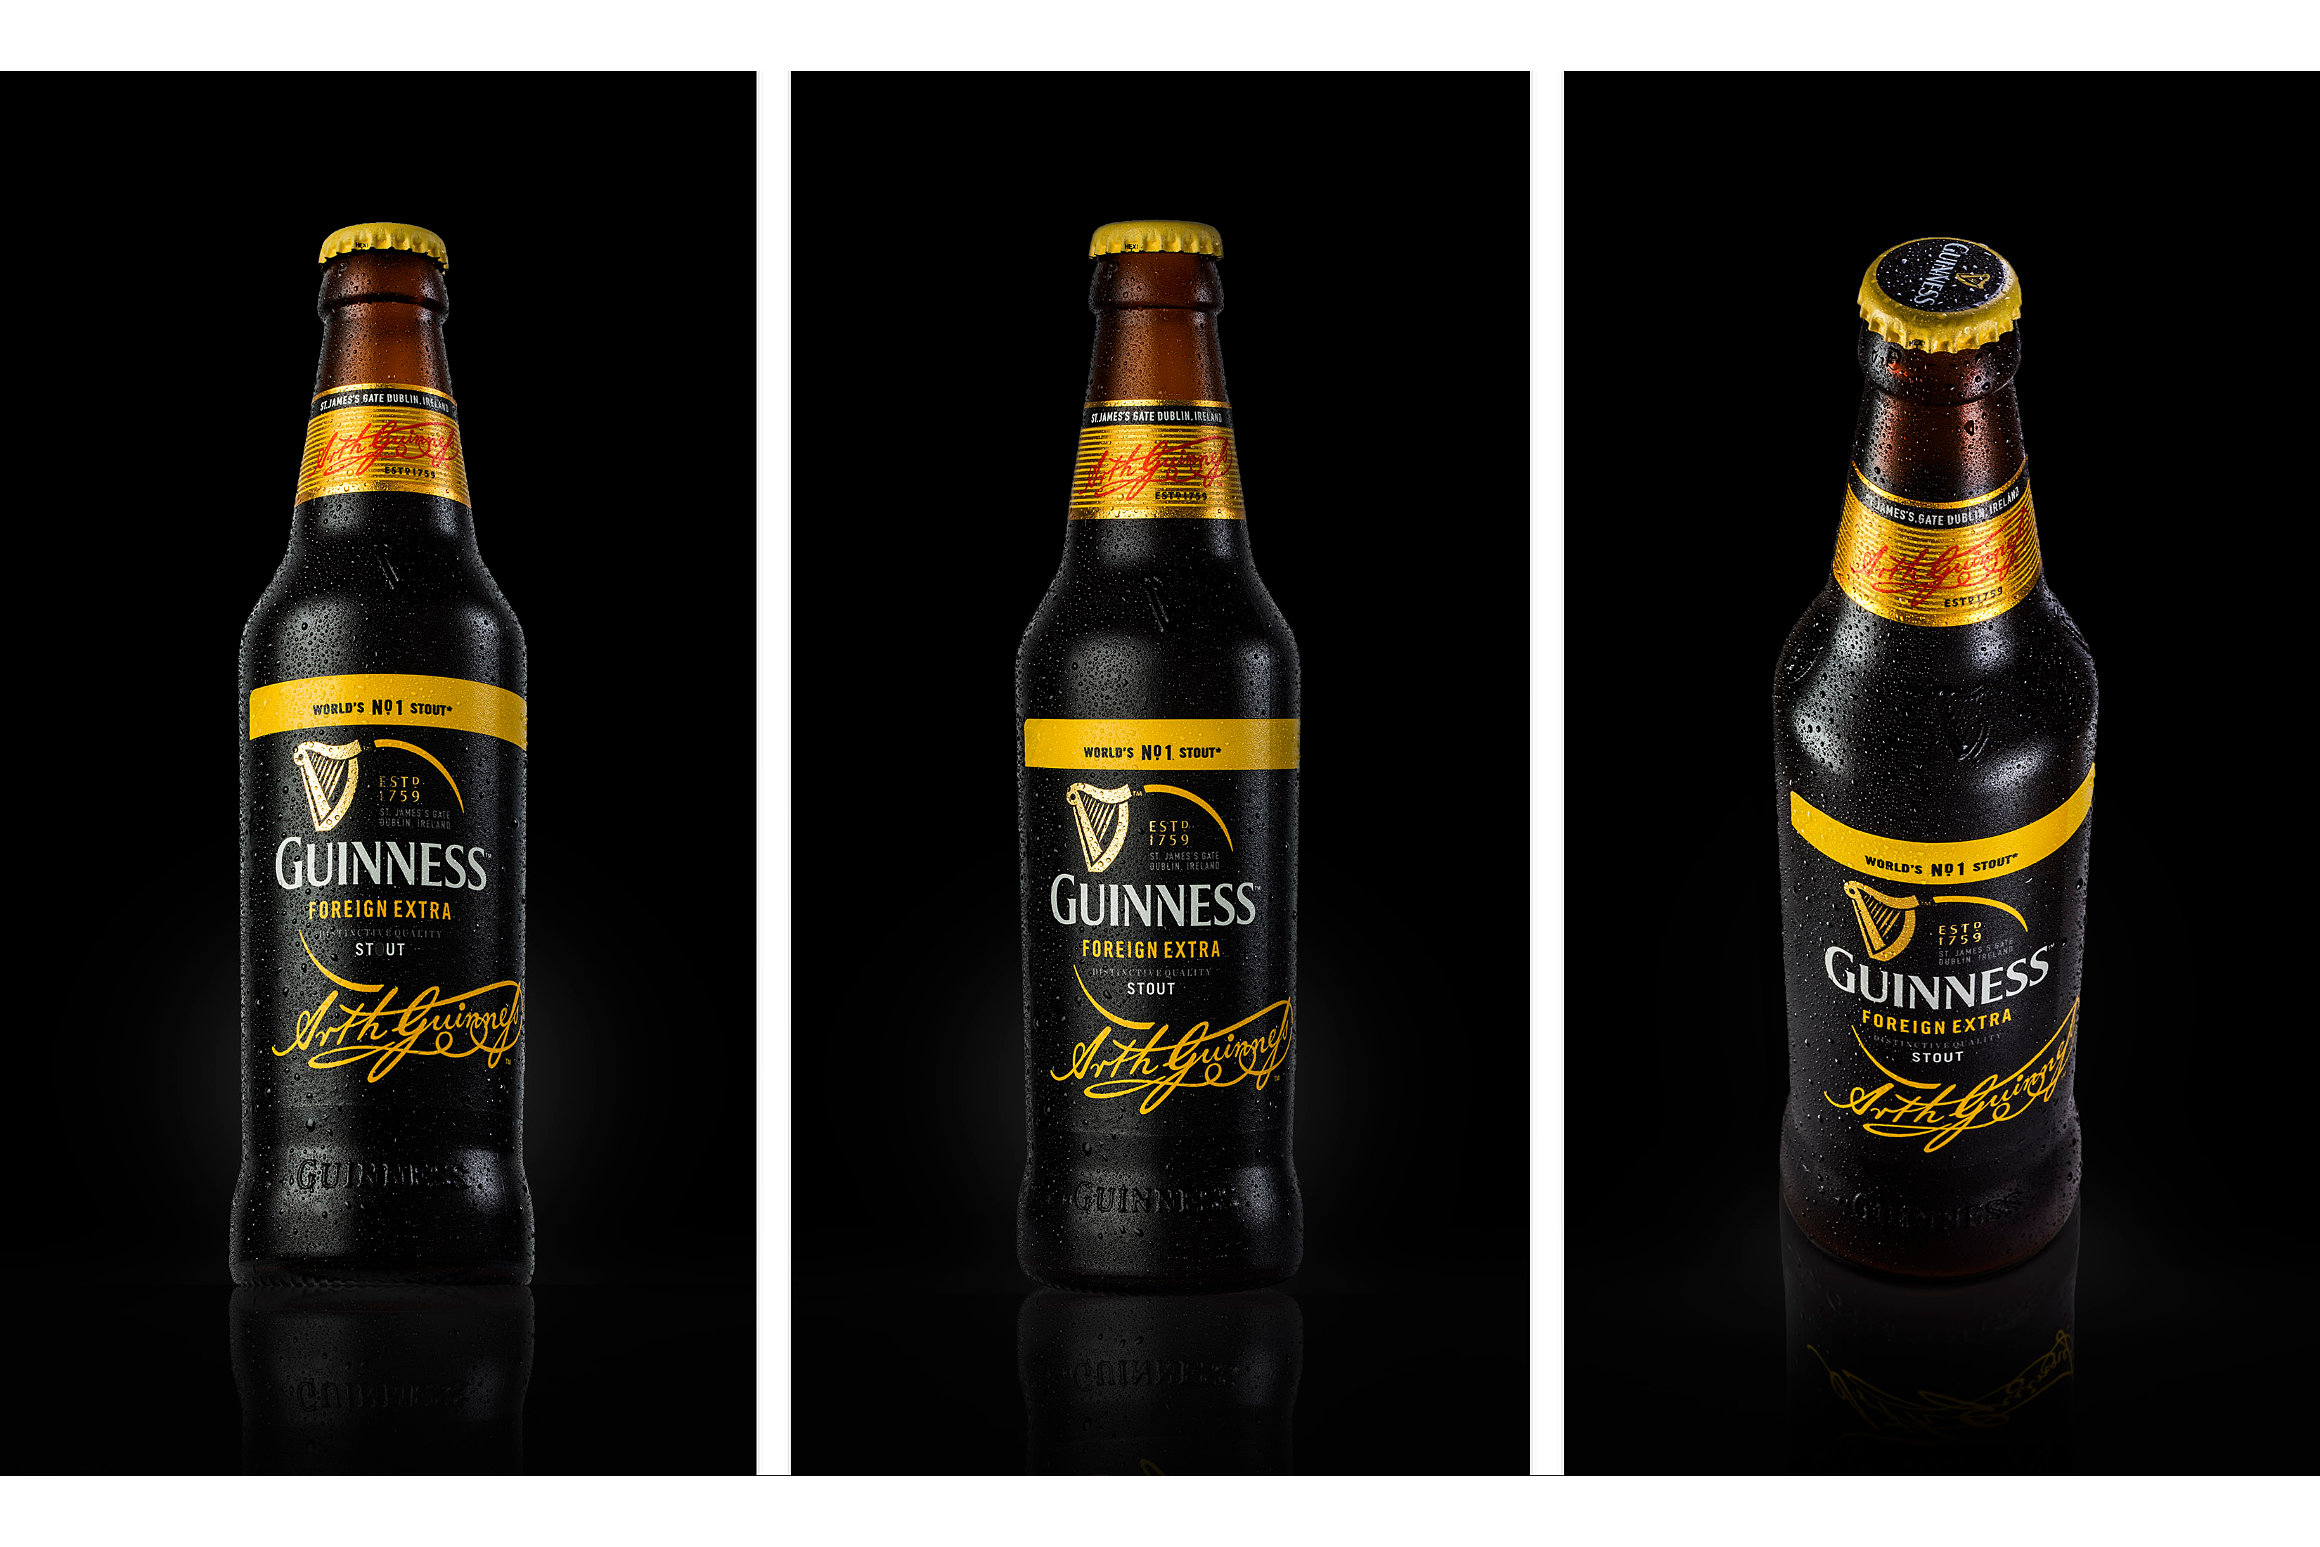 Guinness Beer bottle photography - Cambodia